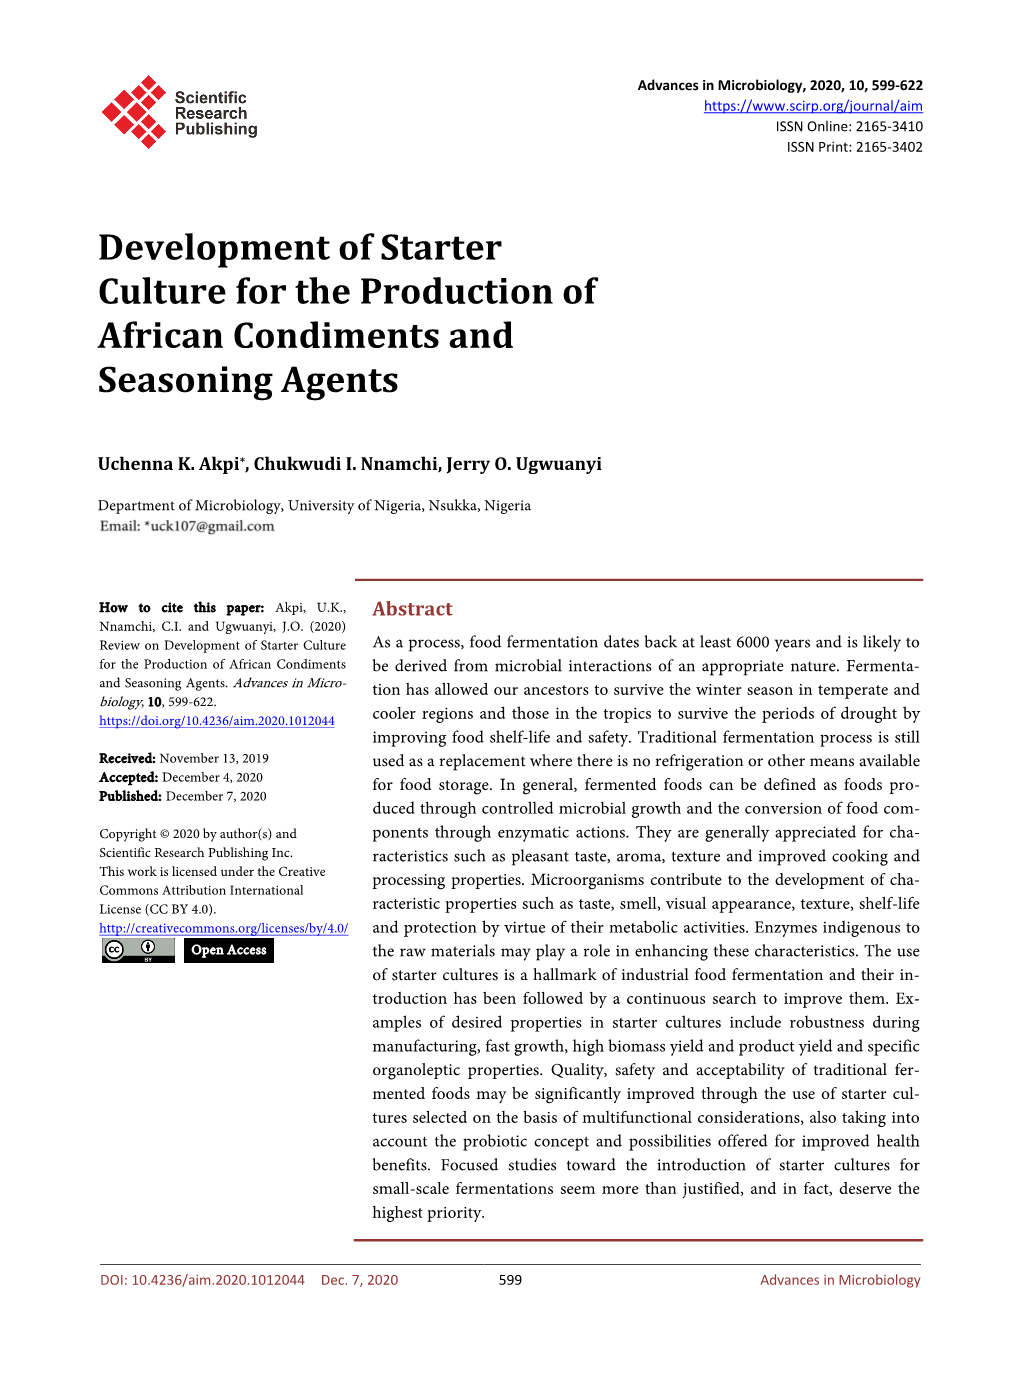 Development of Starter Culture for the Production of African Condiments and Seasoning Agents